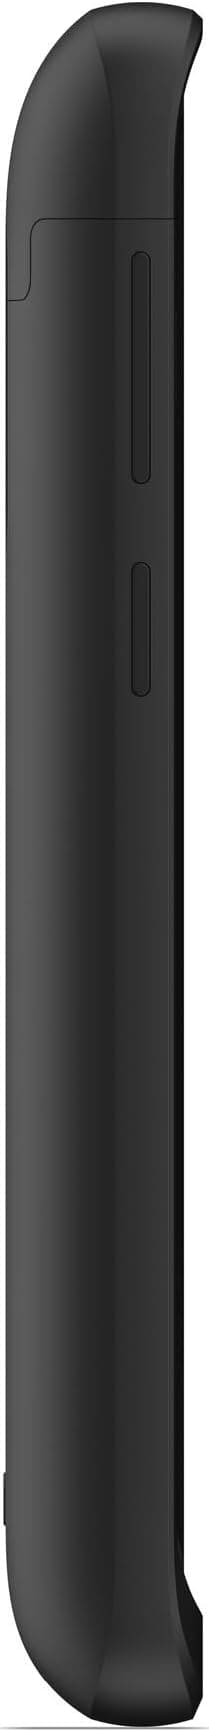 Mophie Galaxy S9 Juice Pack